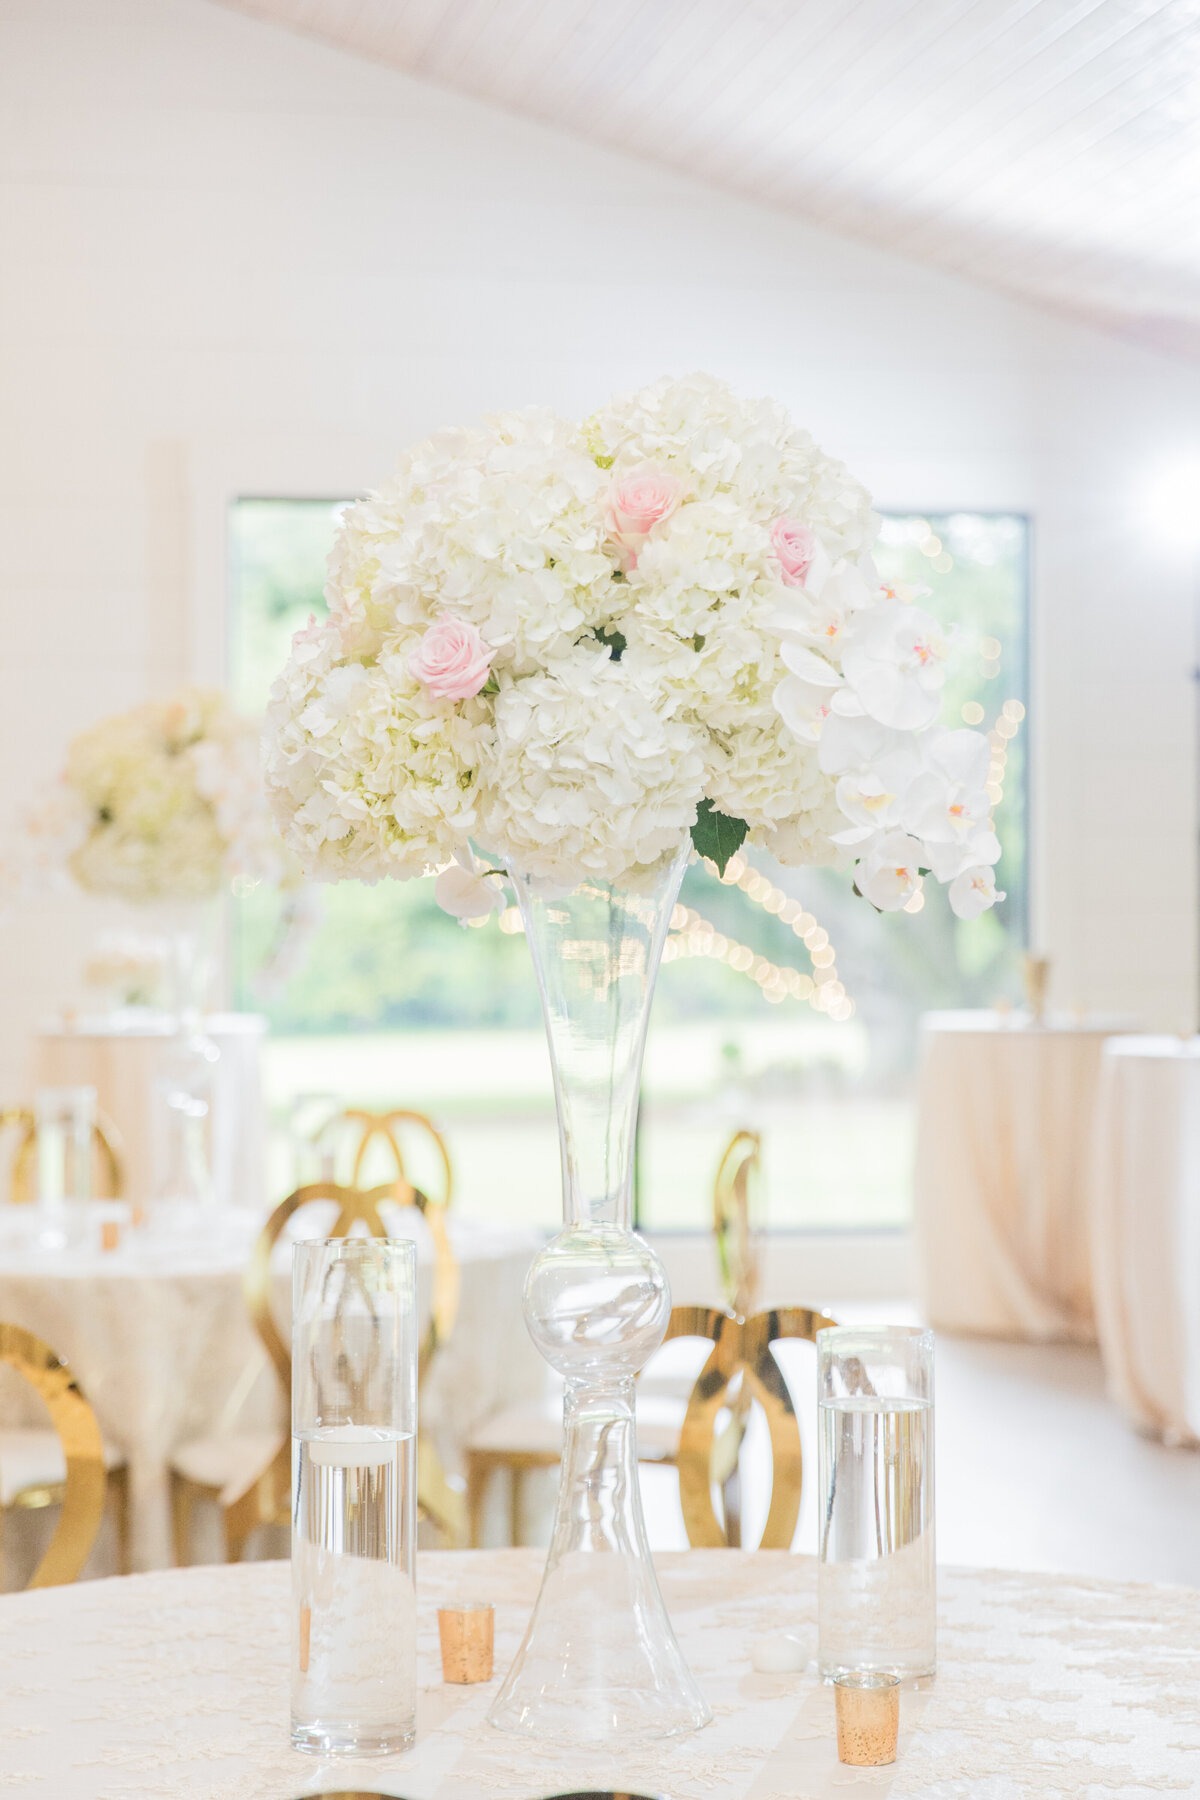 a vase of flowers as a table centerpiece for a wedding